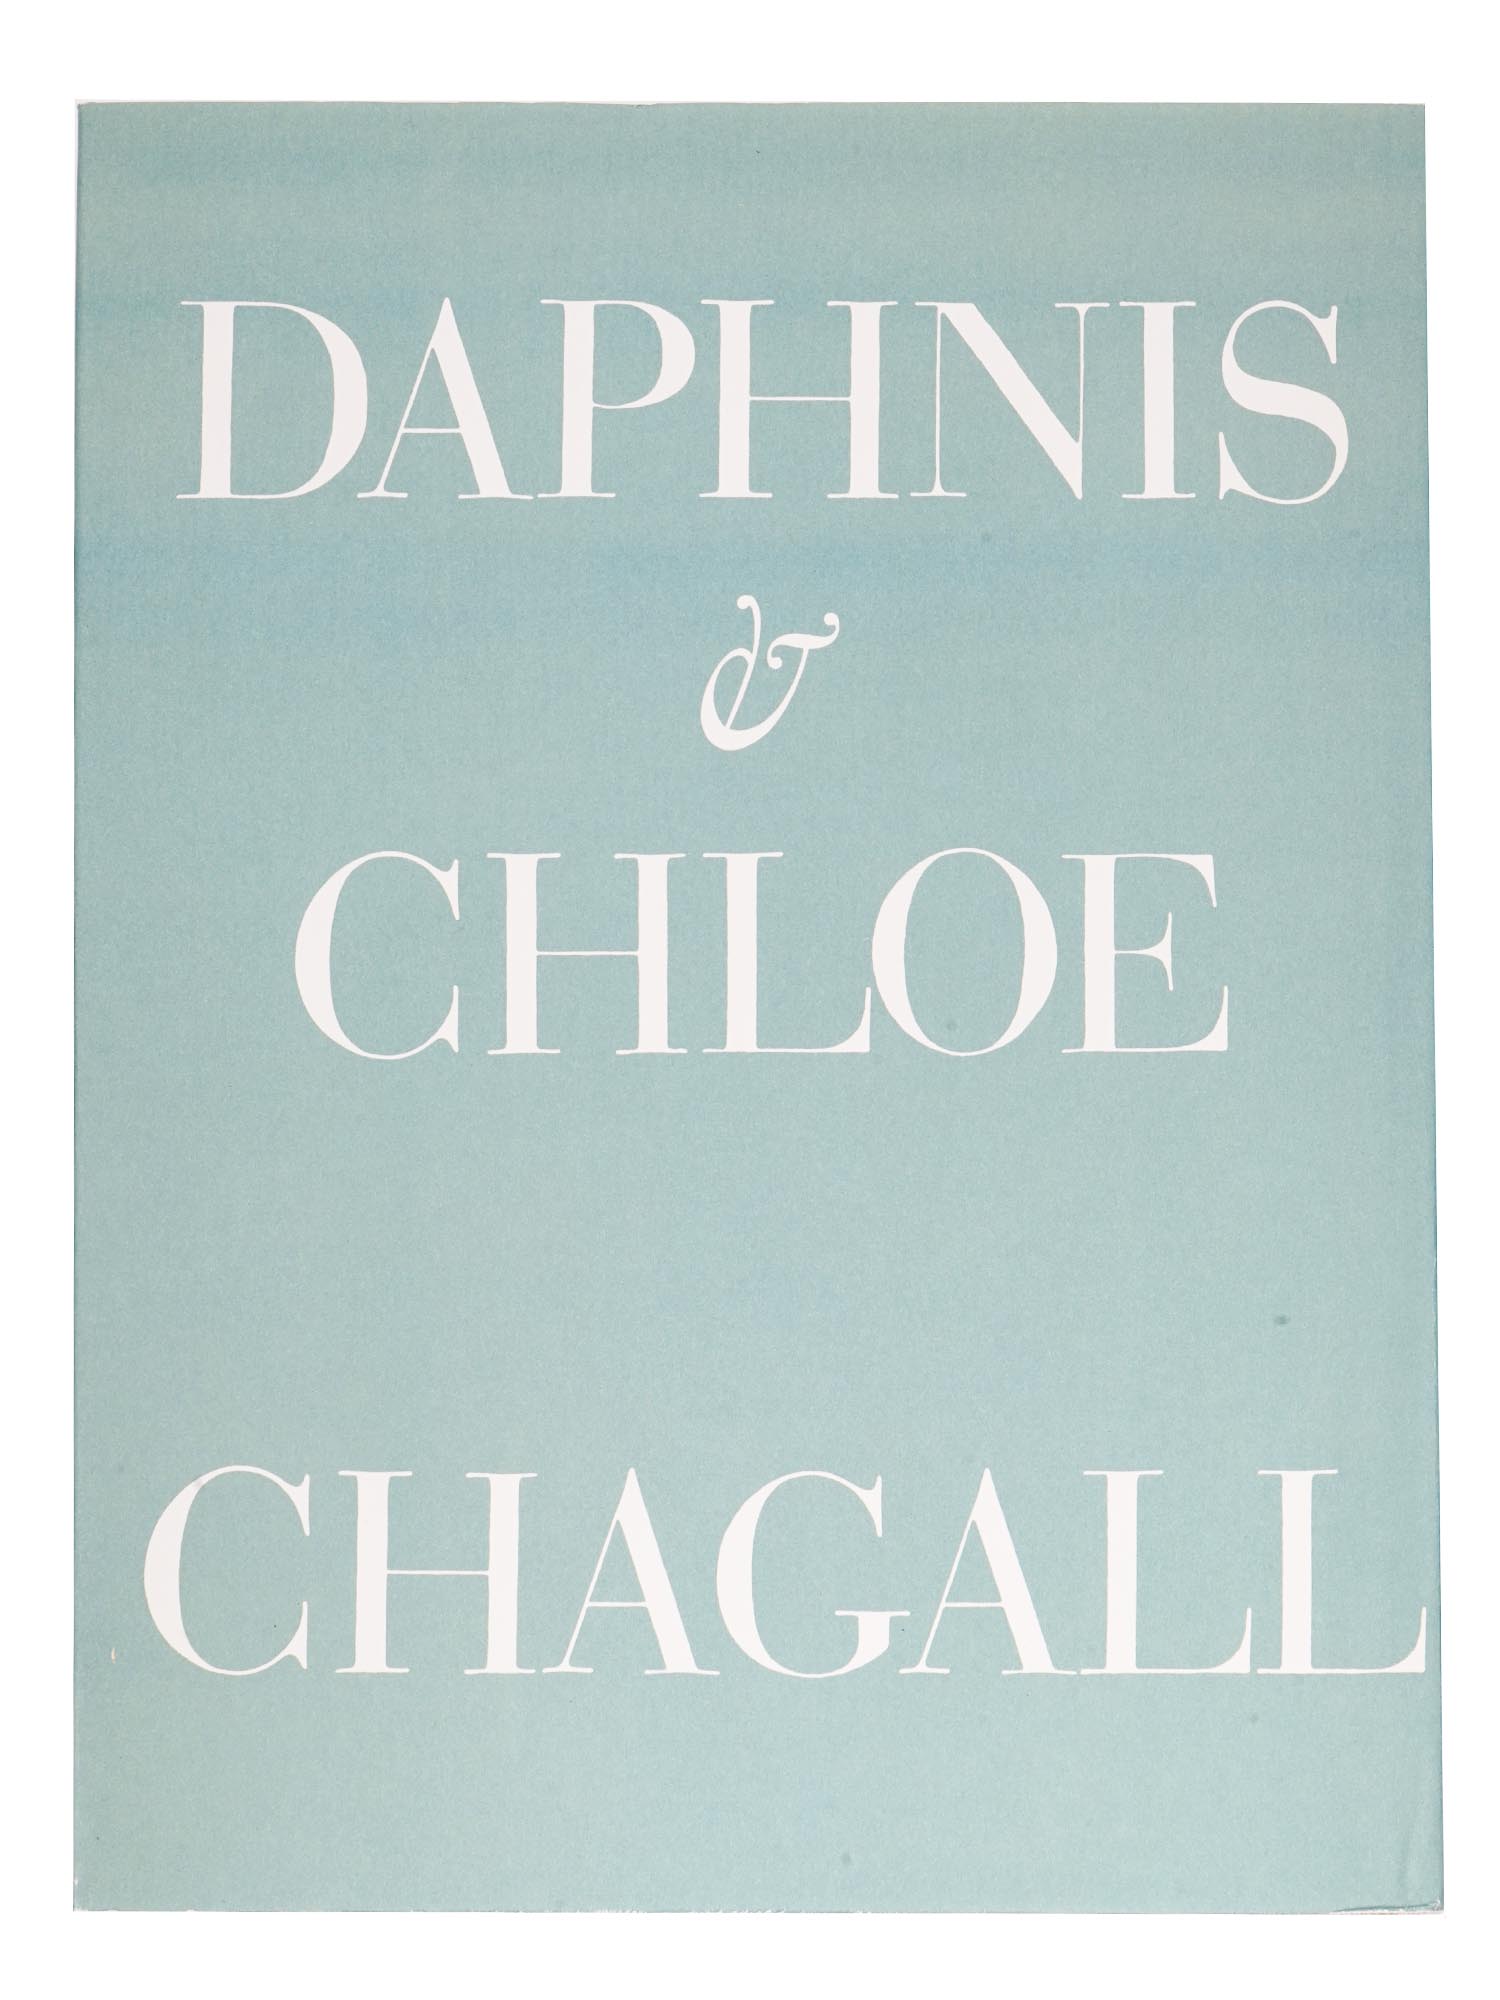 DAPHNIS AND CHLOE BOOK ILLUSTRATED BY MARC CHAGALL PIC-3